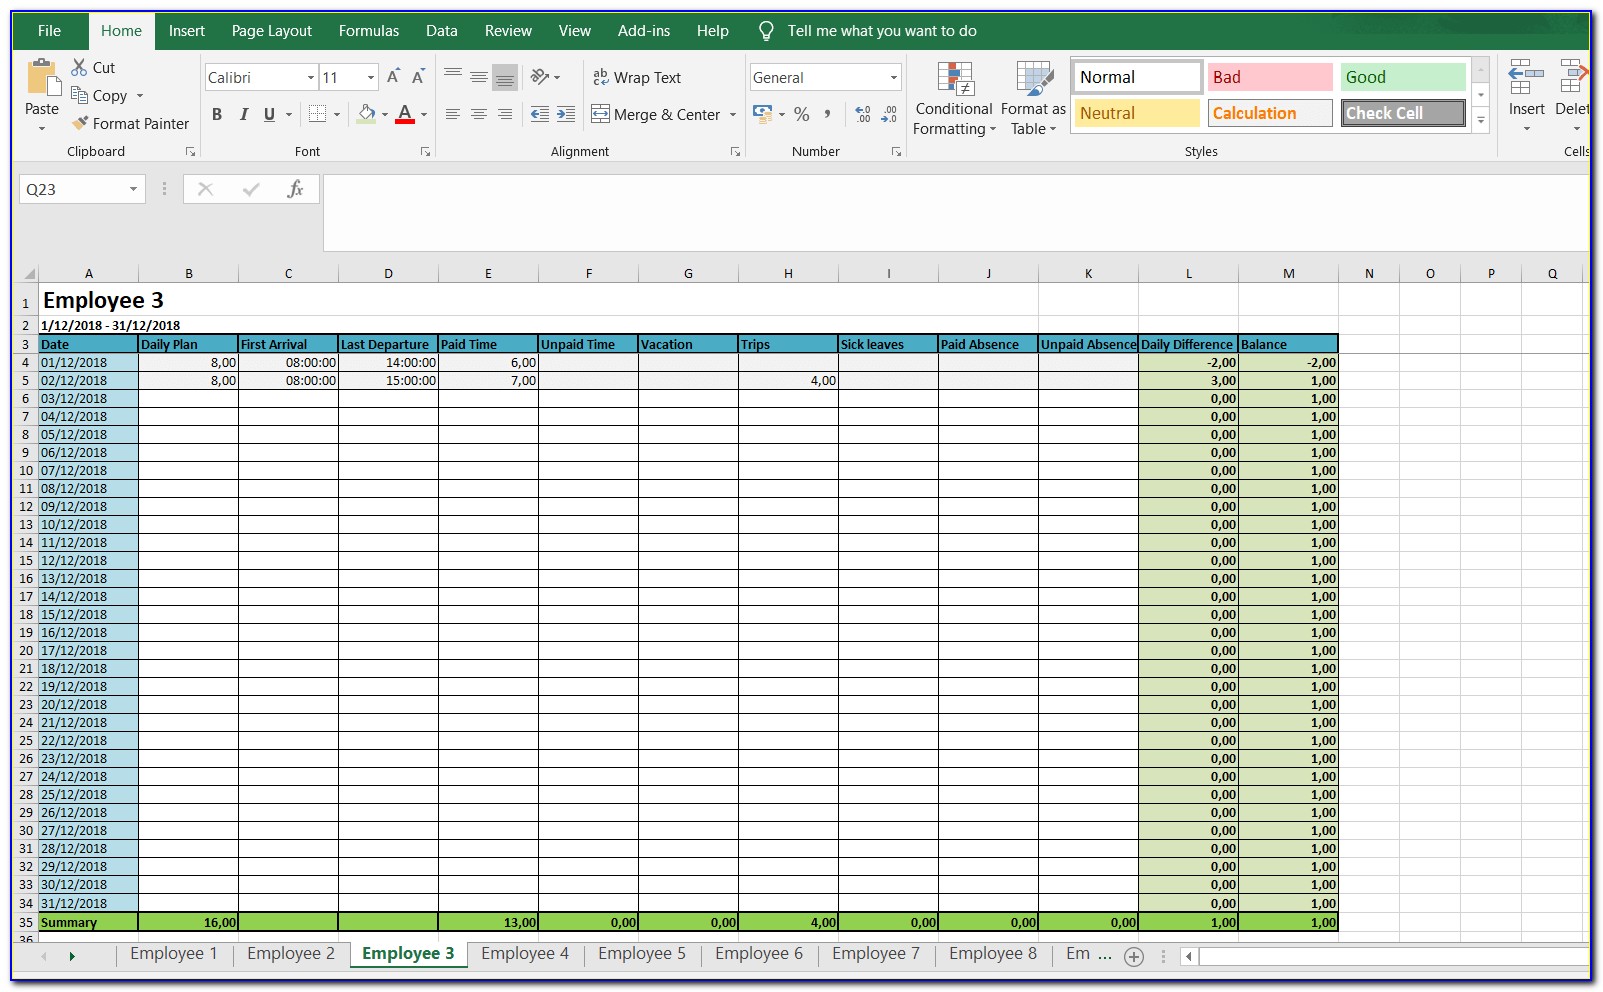 Excel Weekly Employee Timesheet Template Software